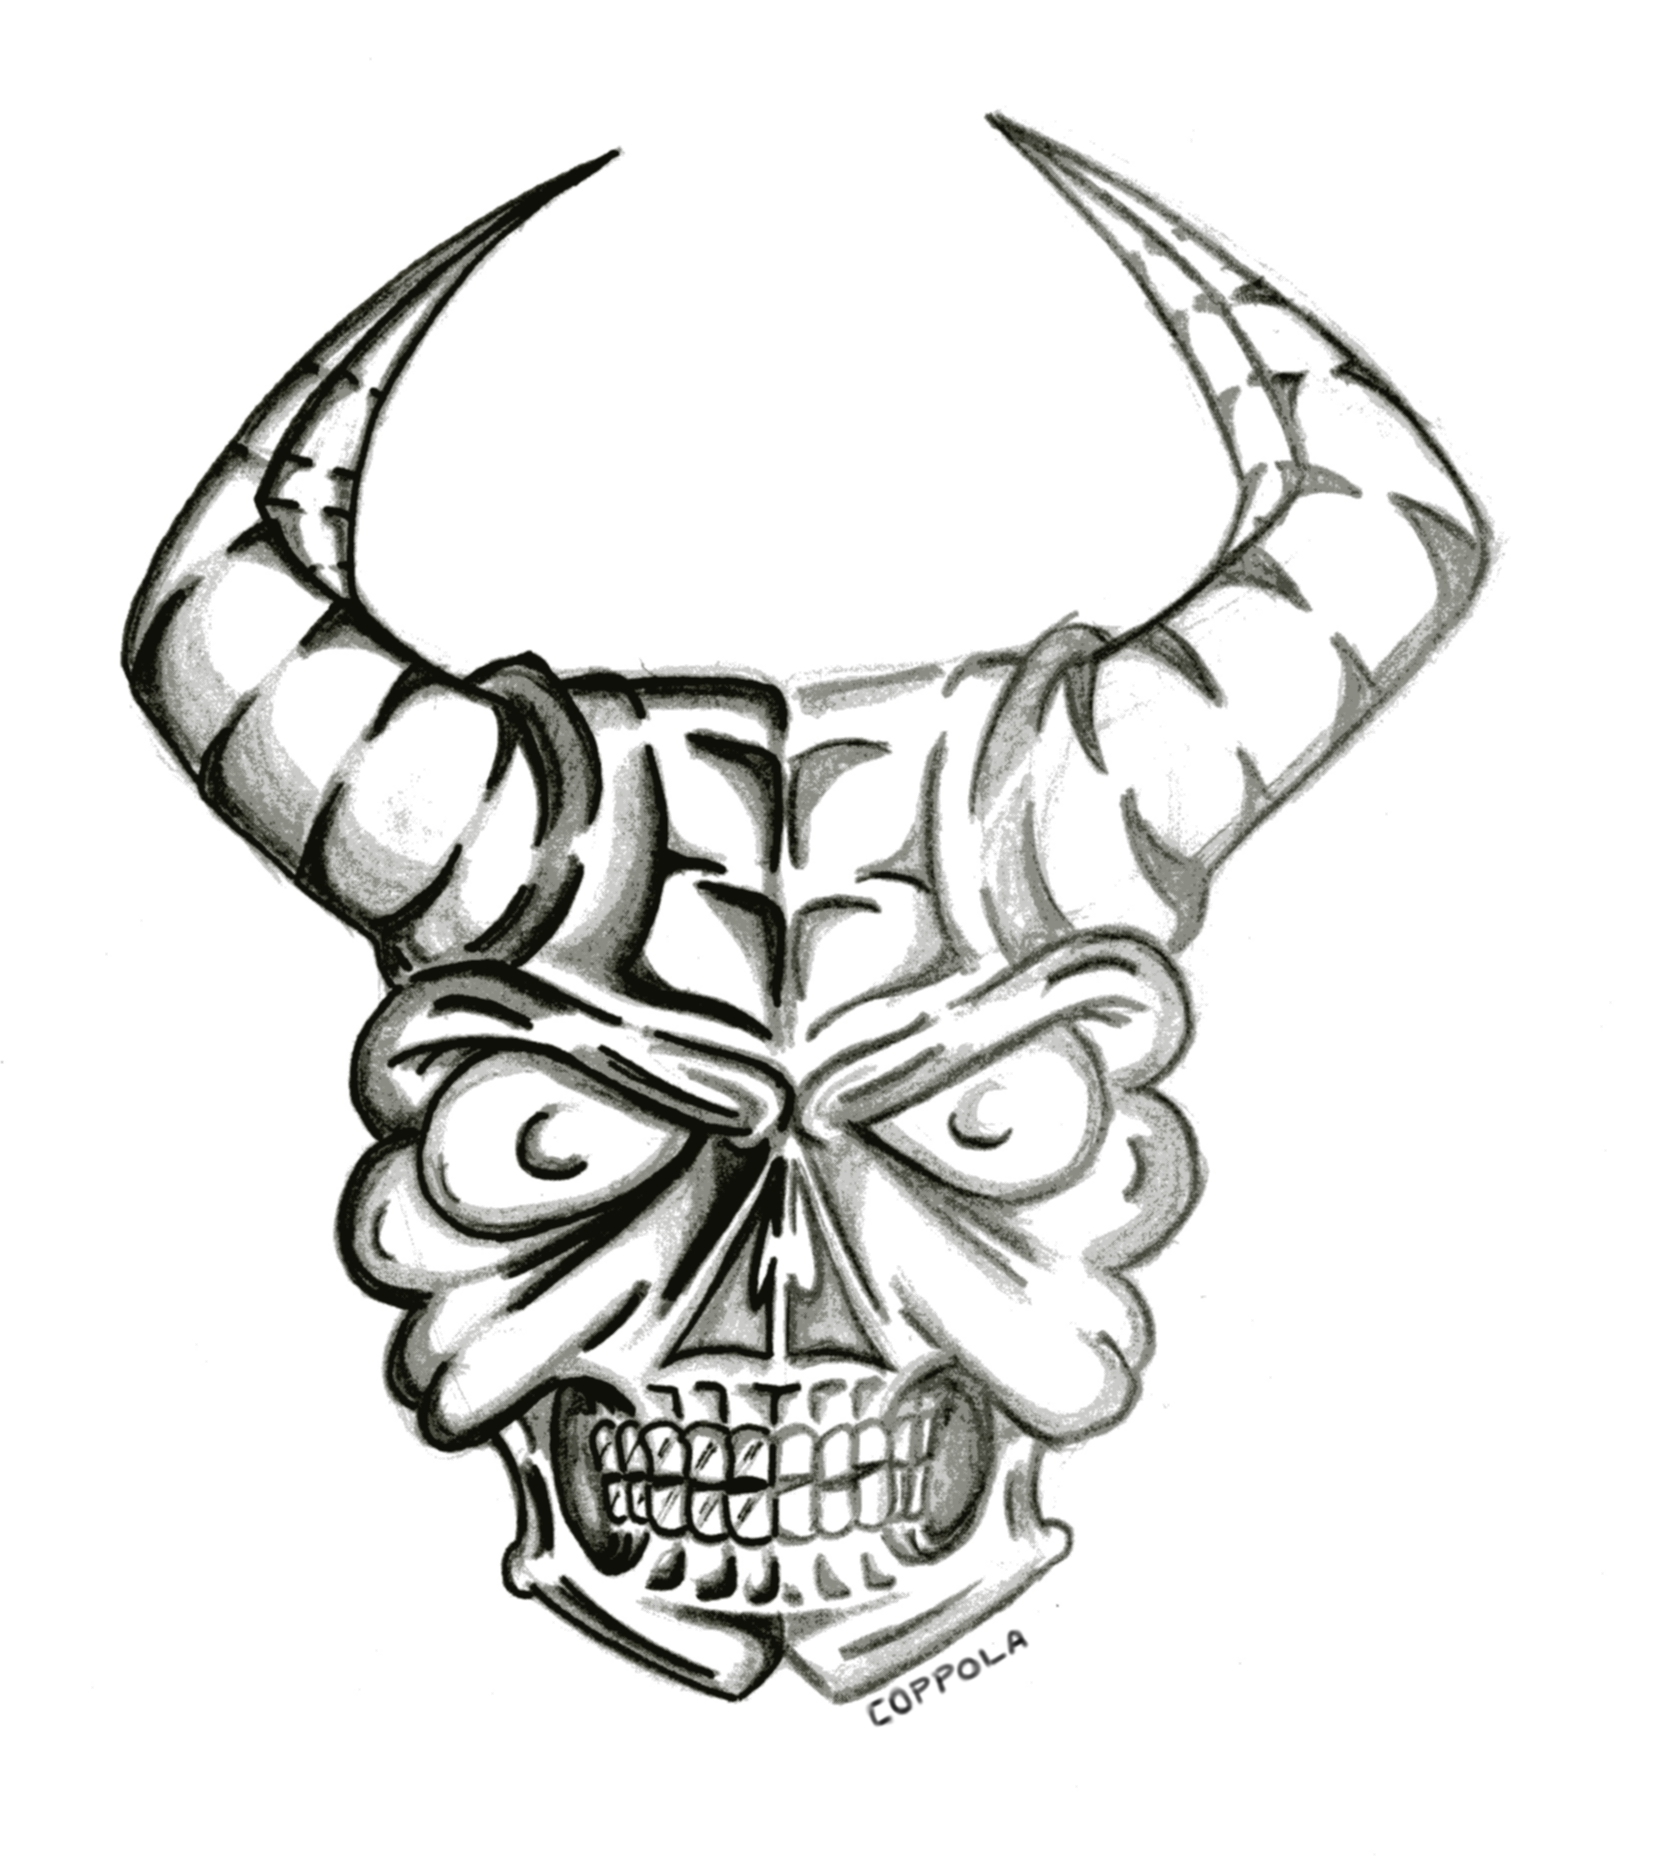 Skull Fire Drawings Kreview - Clipart library - Clipart library